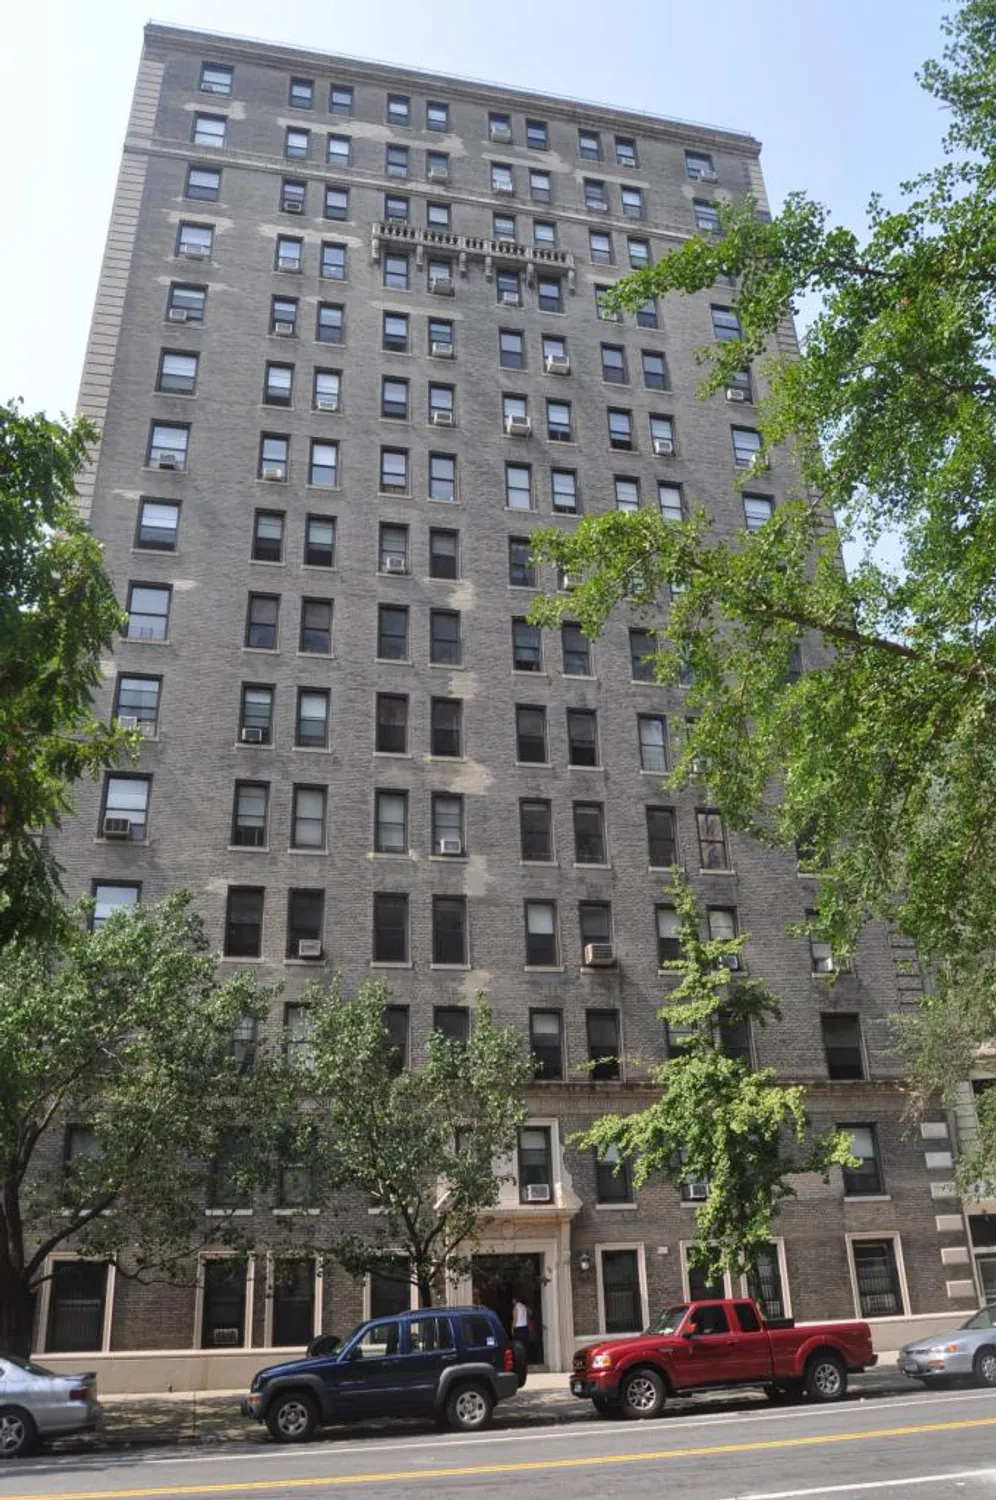 310 West 106th Street on a wide tree-lined block